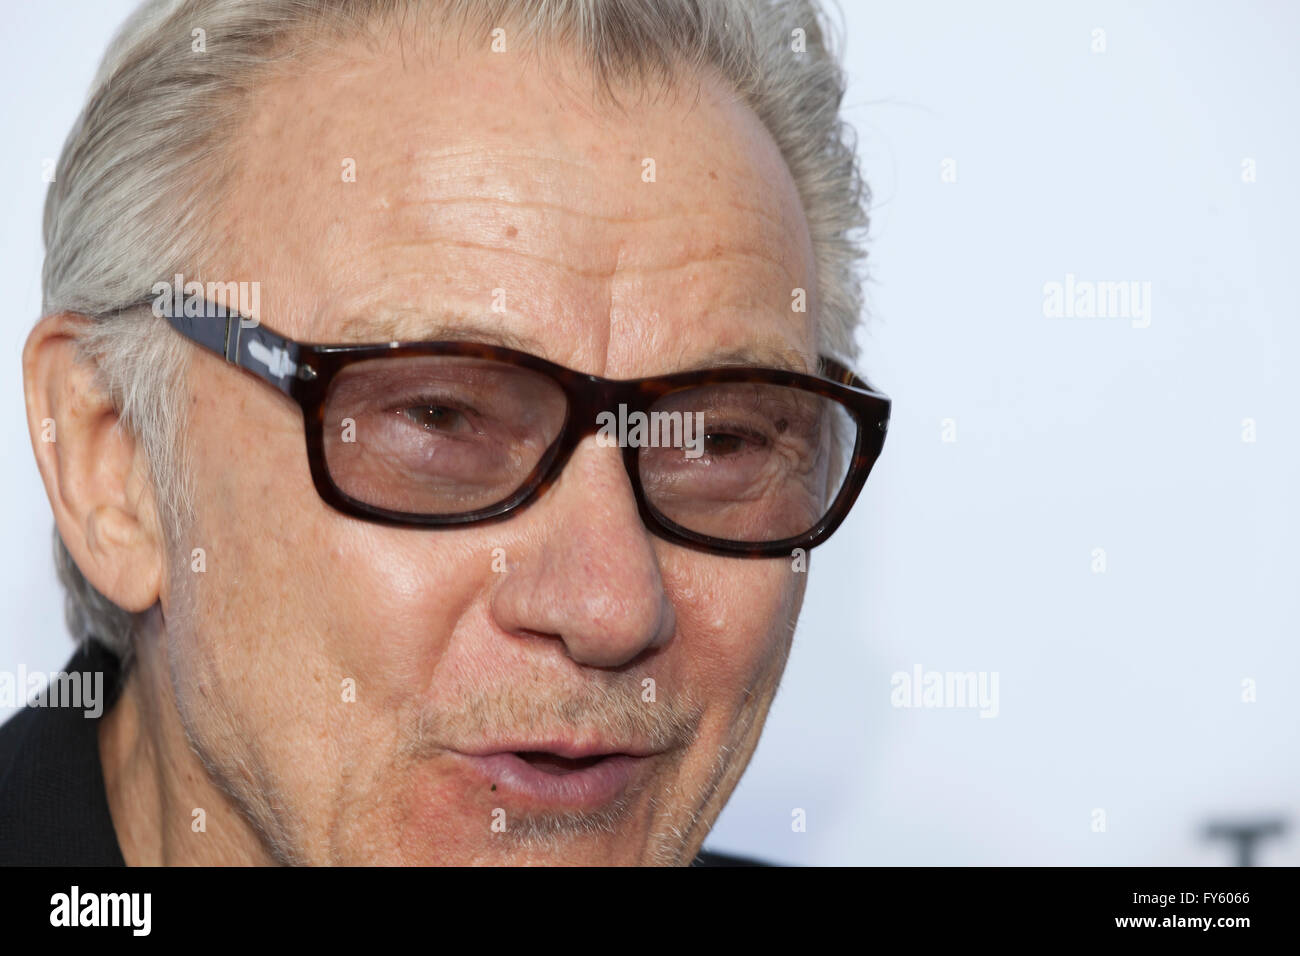 New York, USA. 22nd April, 2016. Harvey Keitel attends 40th anniversary  screening of Taxi Driver at Tribeca Film Festival Credit: lev radin/Alamy  Live News Stock Photo - Alamy